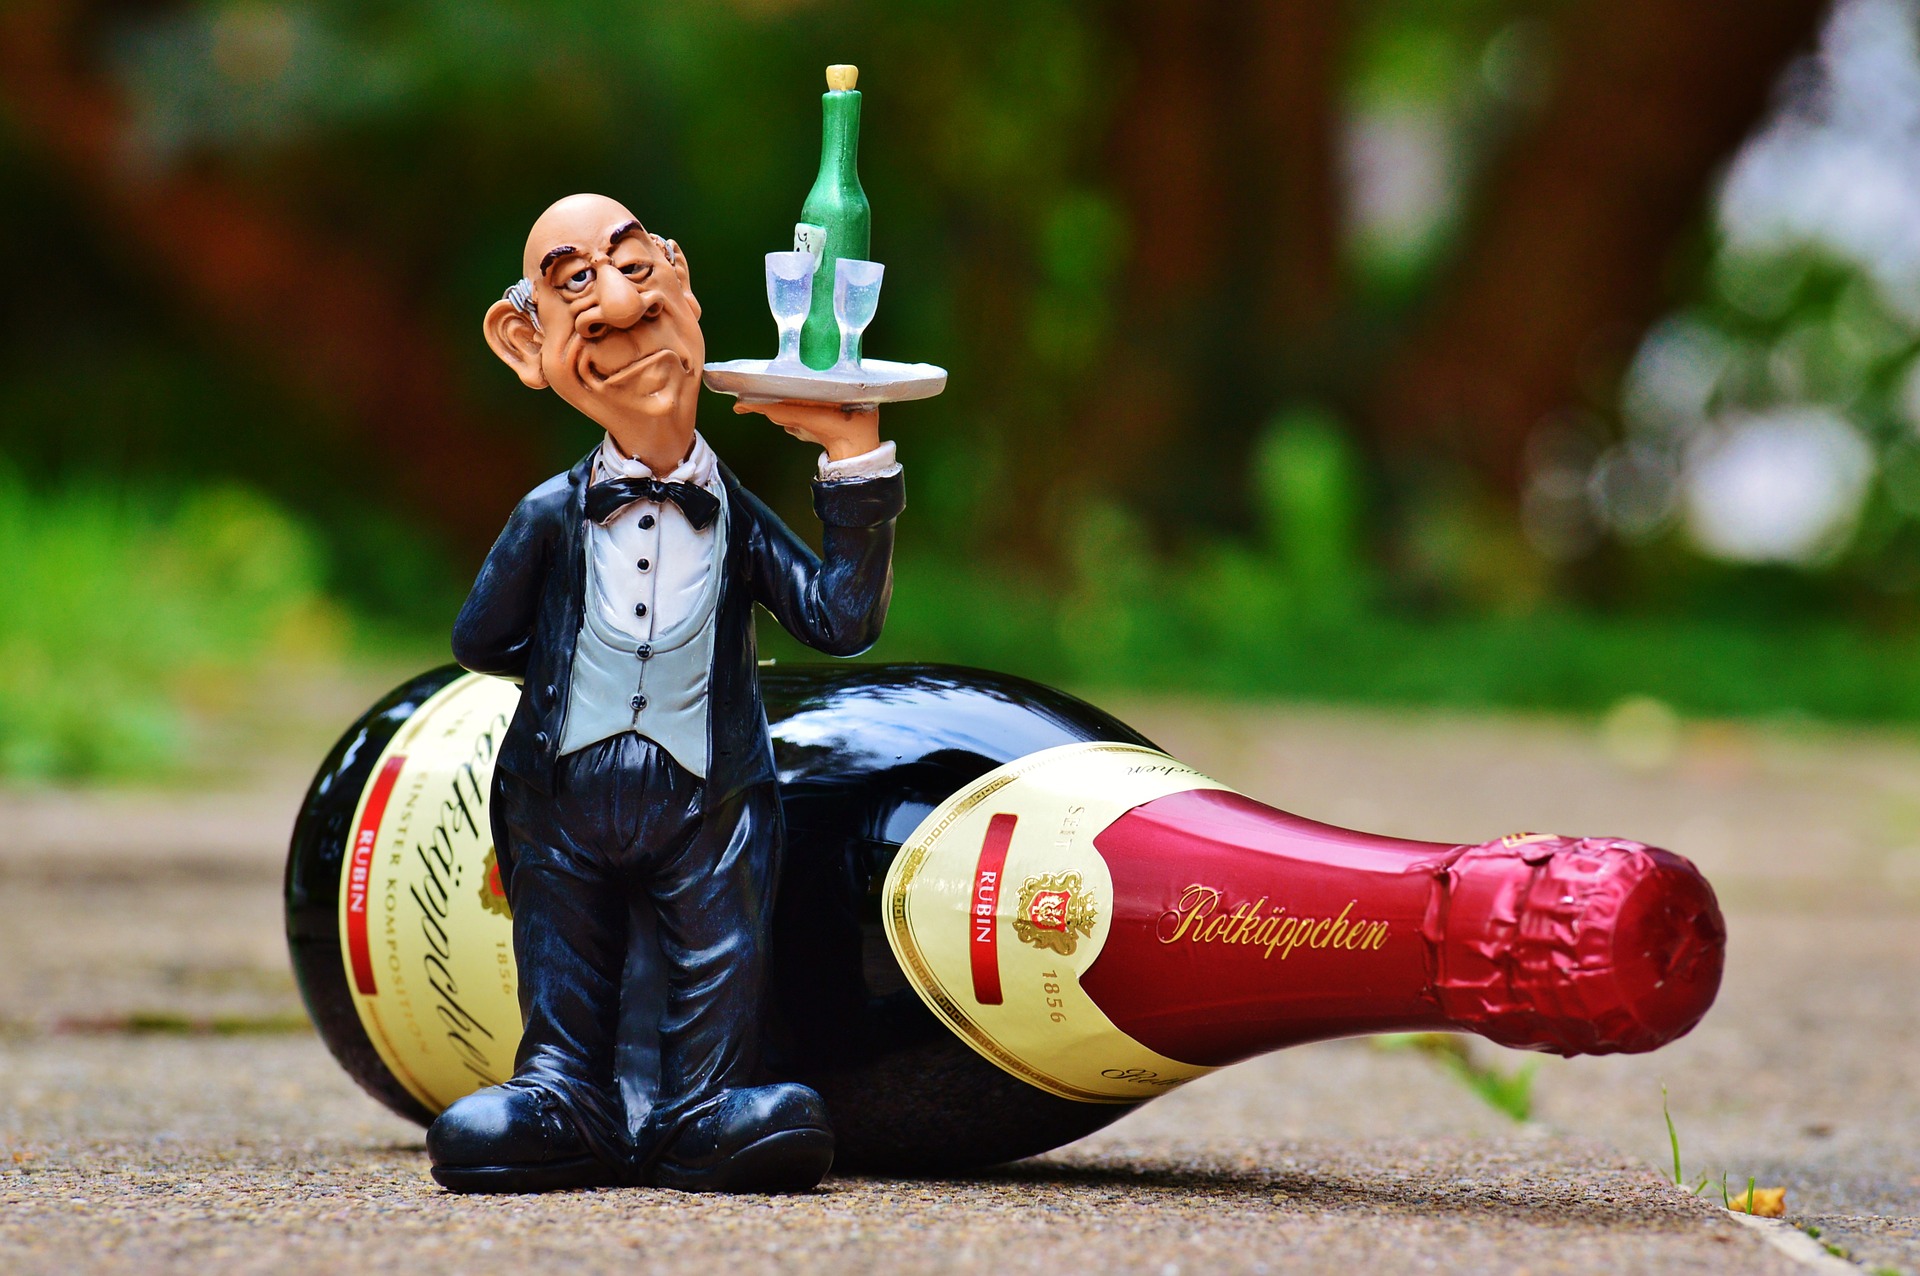 Butler figurine holding wine glasses with a wine bottle behind him